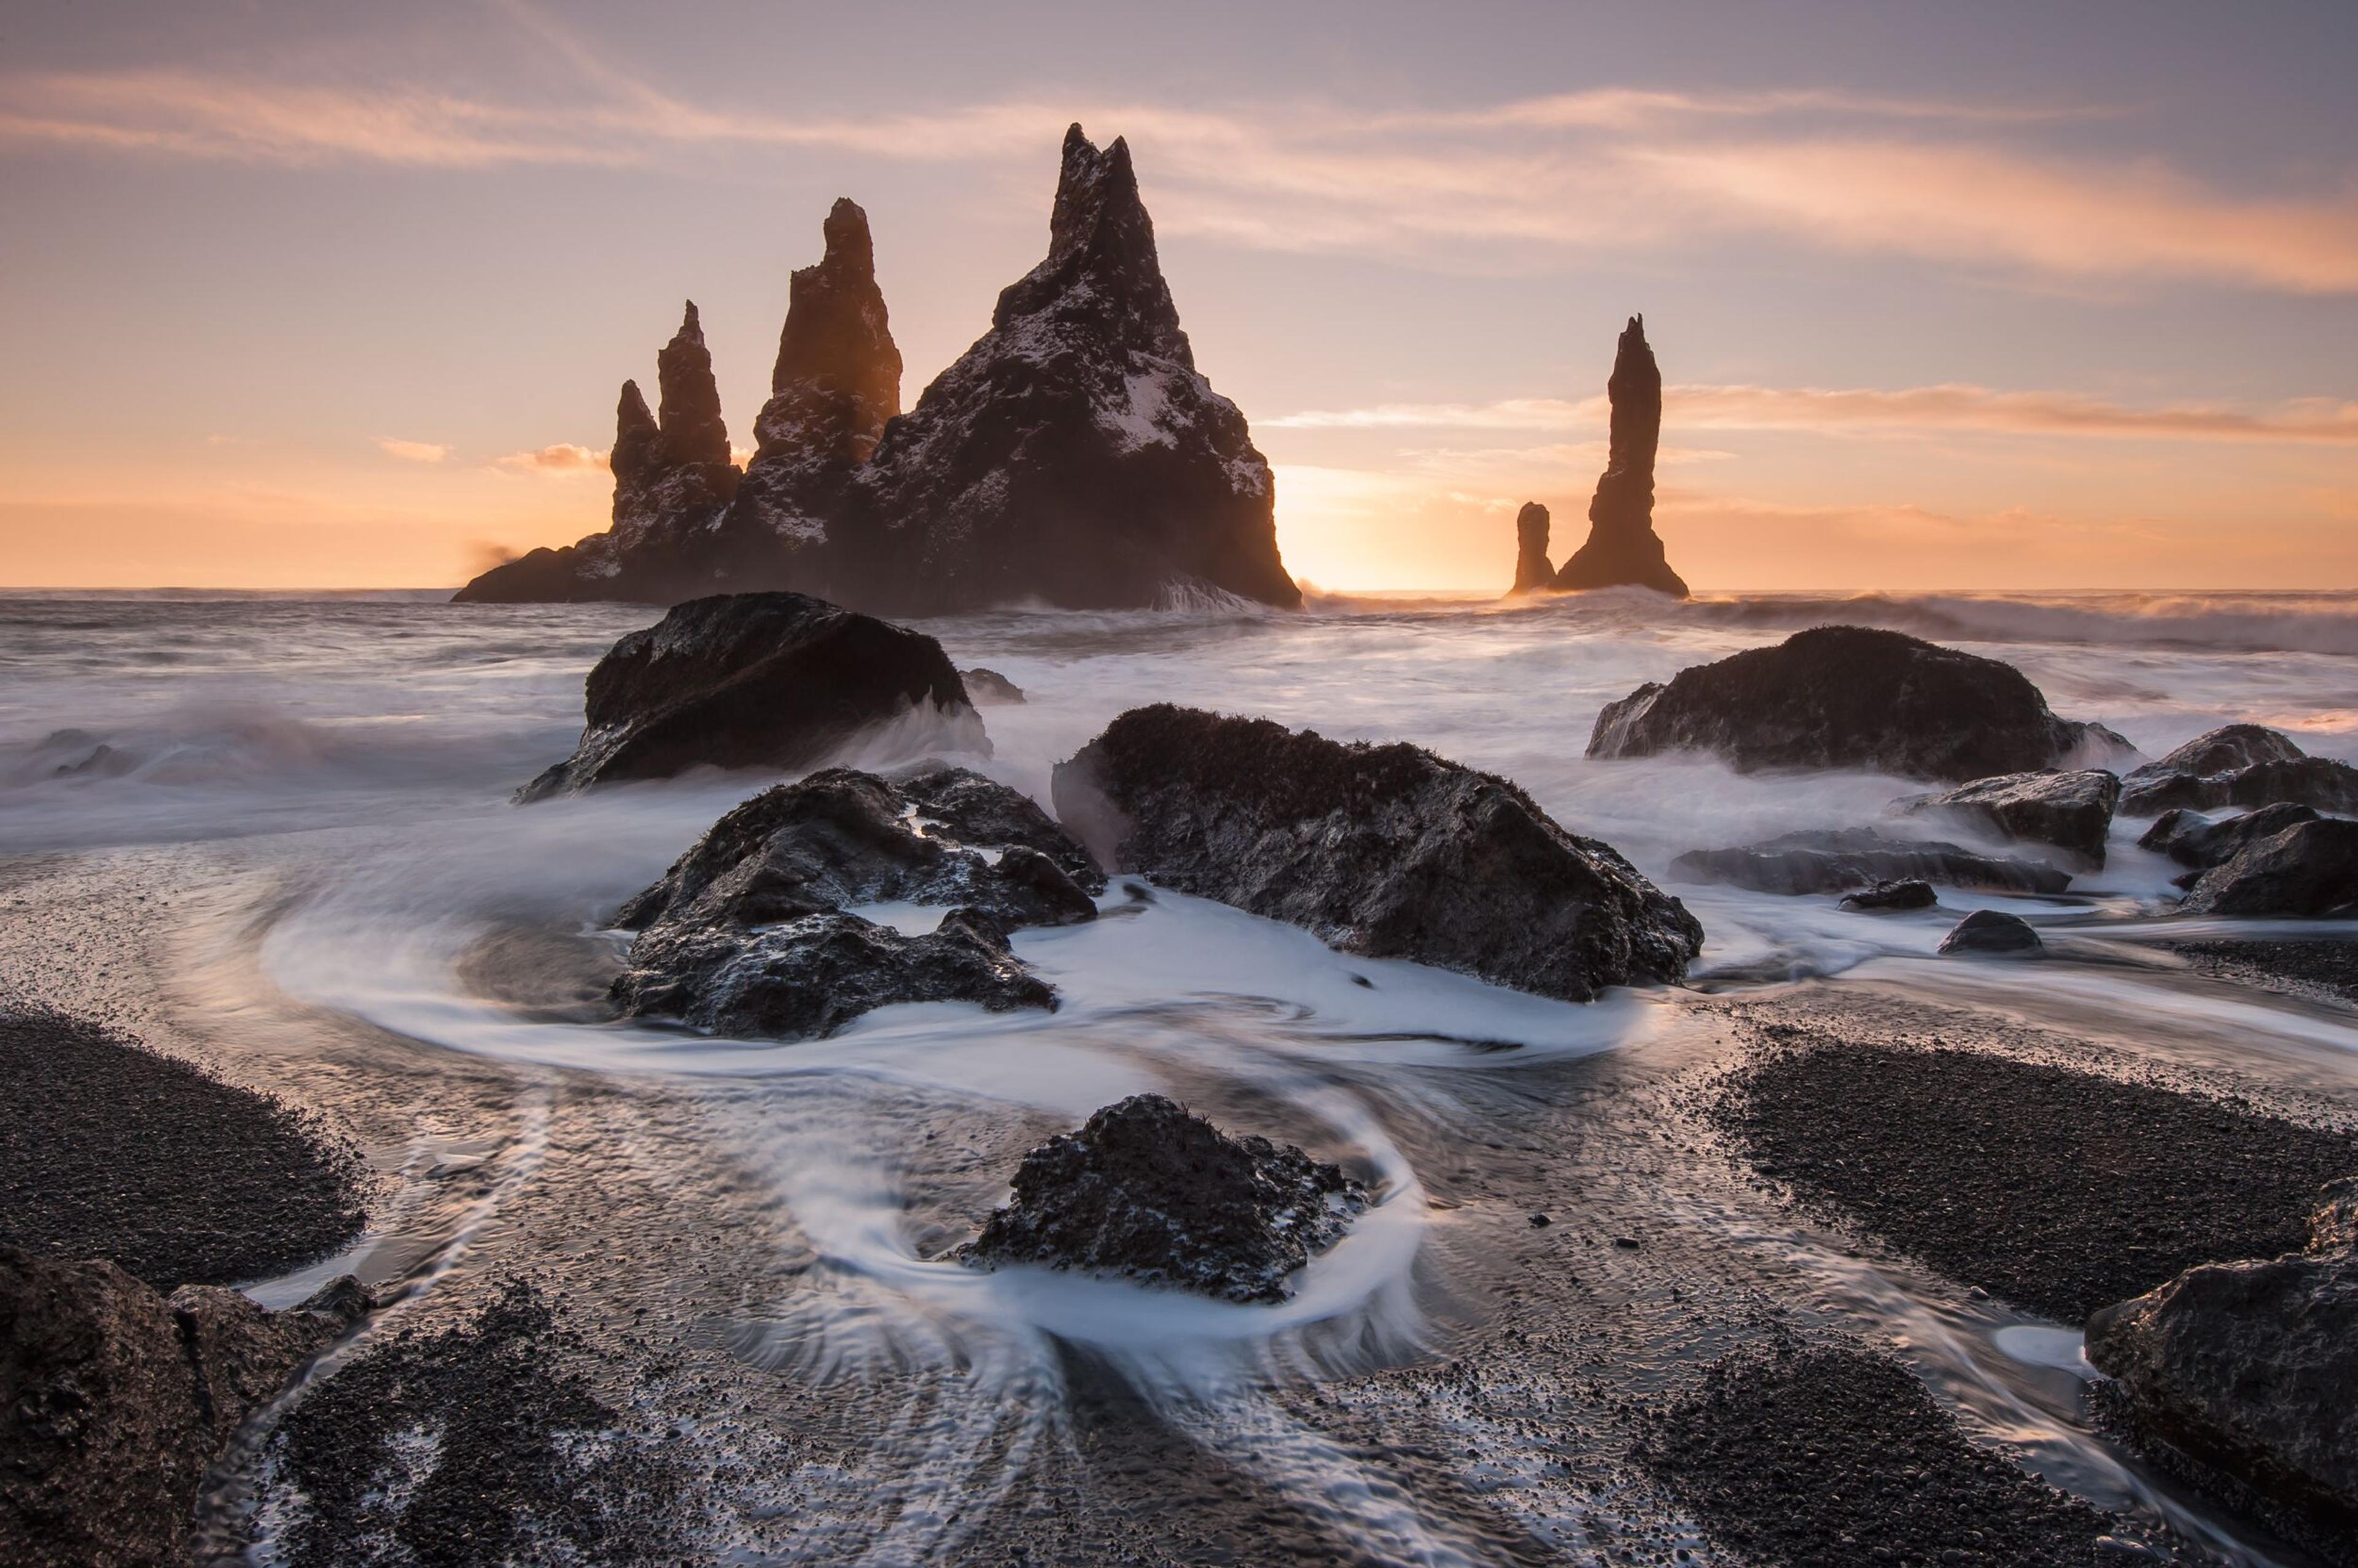 Seascape at sunset with waves swirling around jagged rock formations protruding from the sea, set against a vibrant sky.